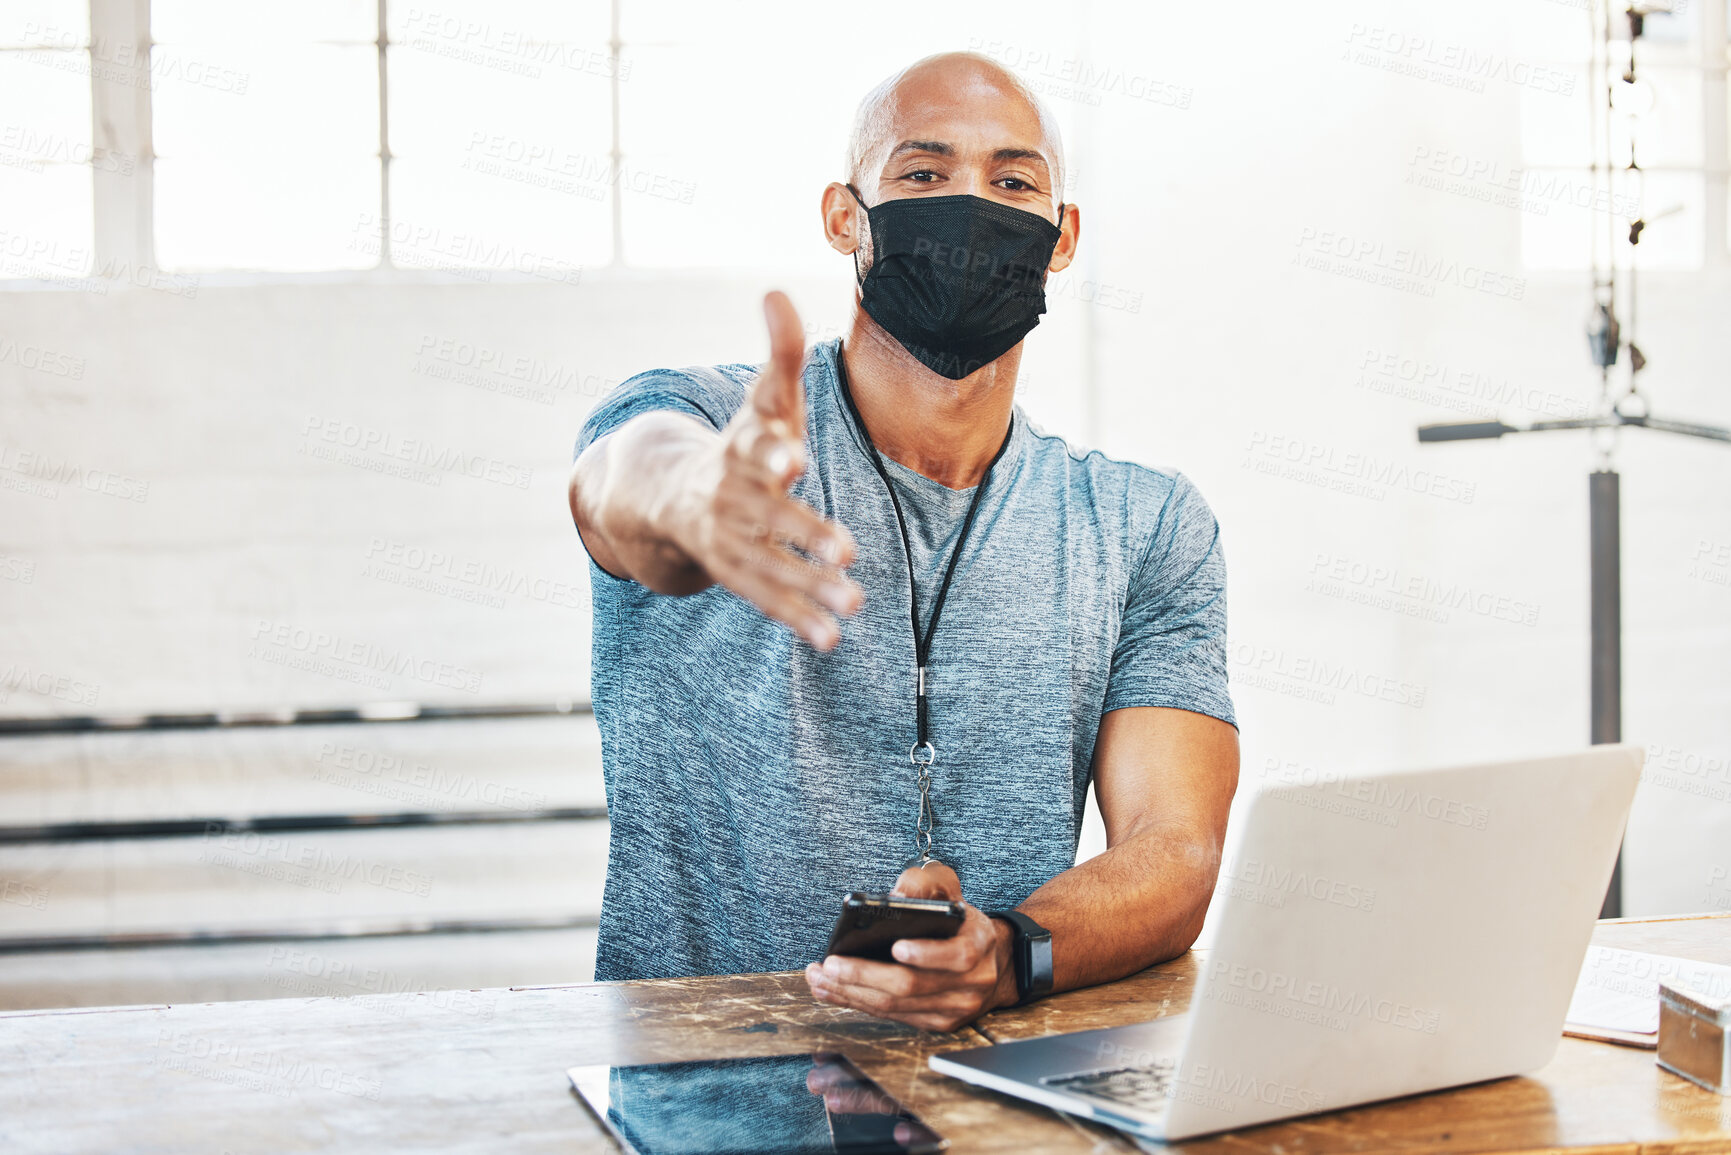 Buy stock photo Portrait of a muscular young man wearing a face mask and extending a handshake while using a laptop in a gym